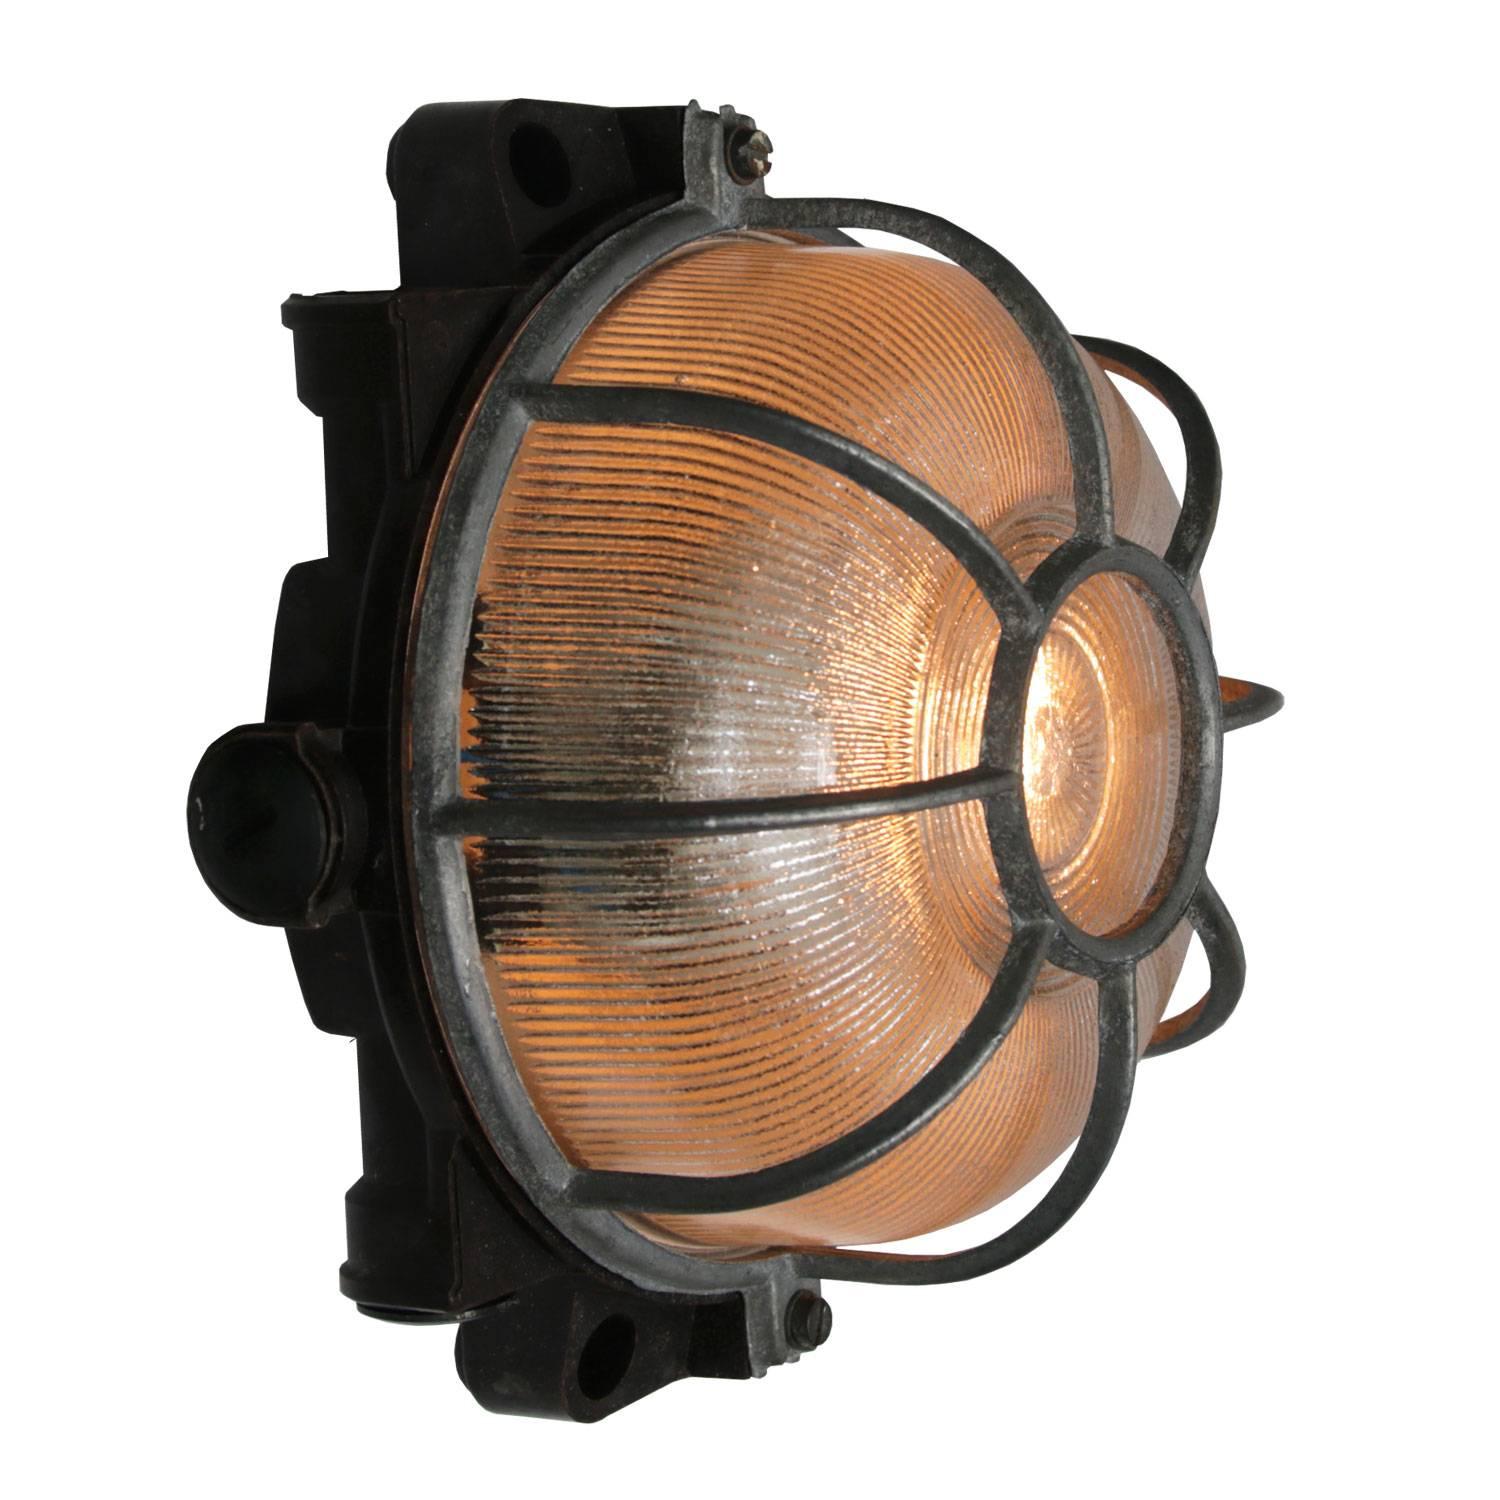 Industrial wall and ceiling scone. Bakelite back. Holophane striped glass.
Aluminium frame.

Measure: Weight 1.0 kg / 2.2 lb

All lamps have been made suitable by international standards for incandescent light bulbs, energy-efficient and LED bulbs.